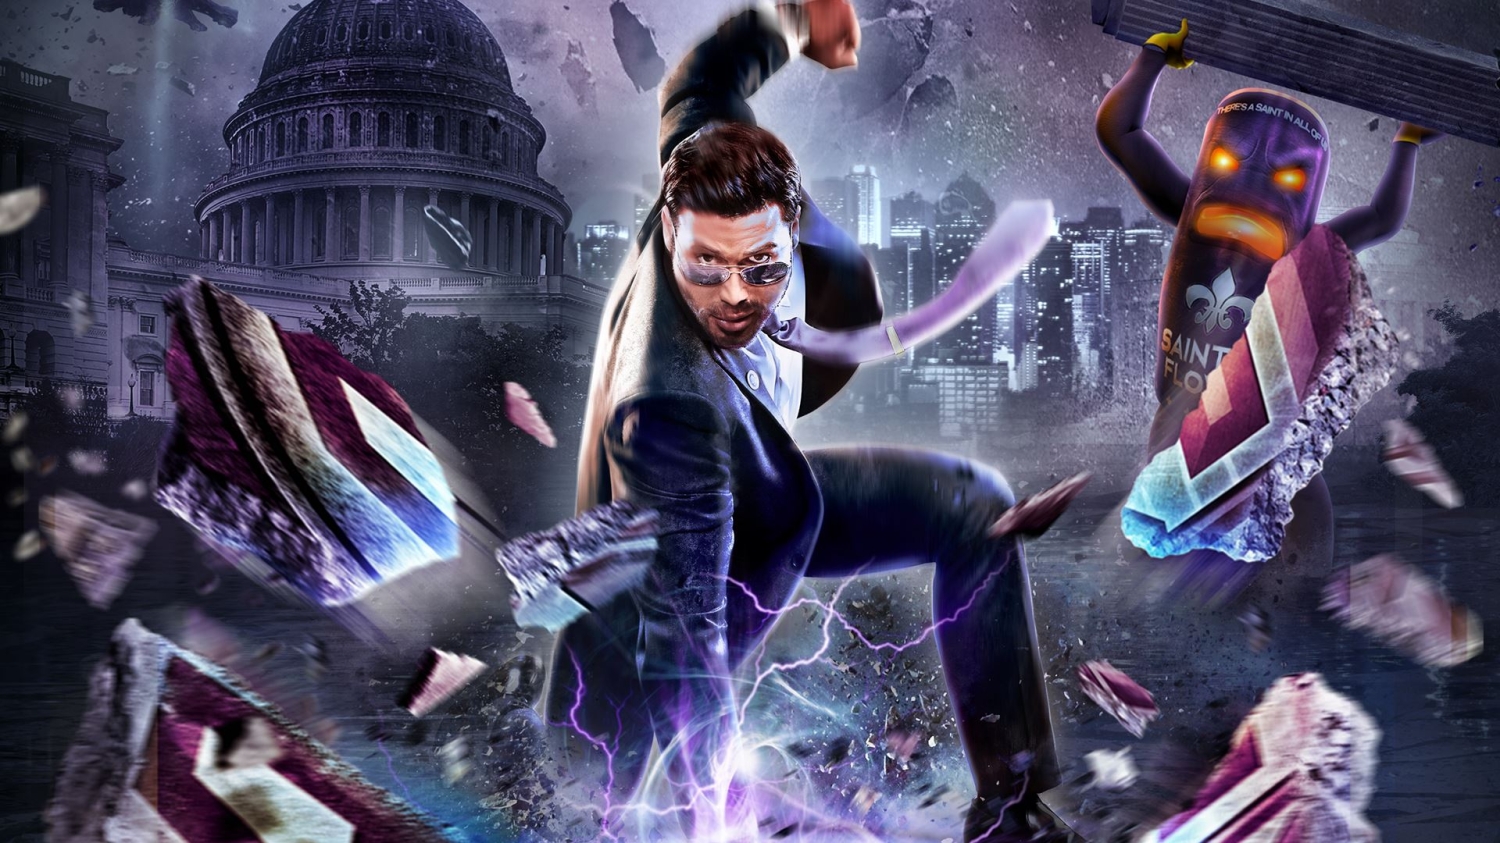 Volition is finally fixing Saints Row 2 for PC - Polygon